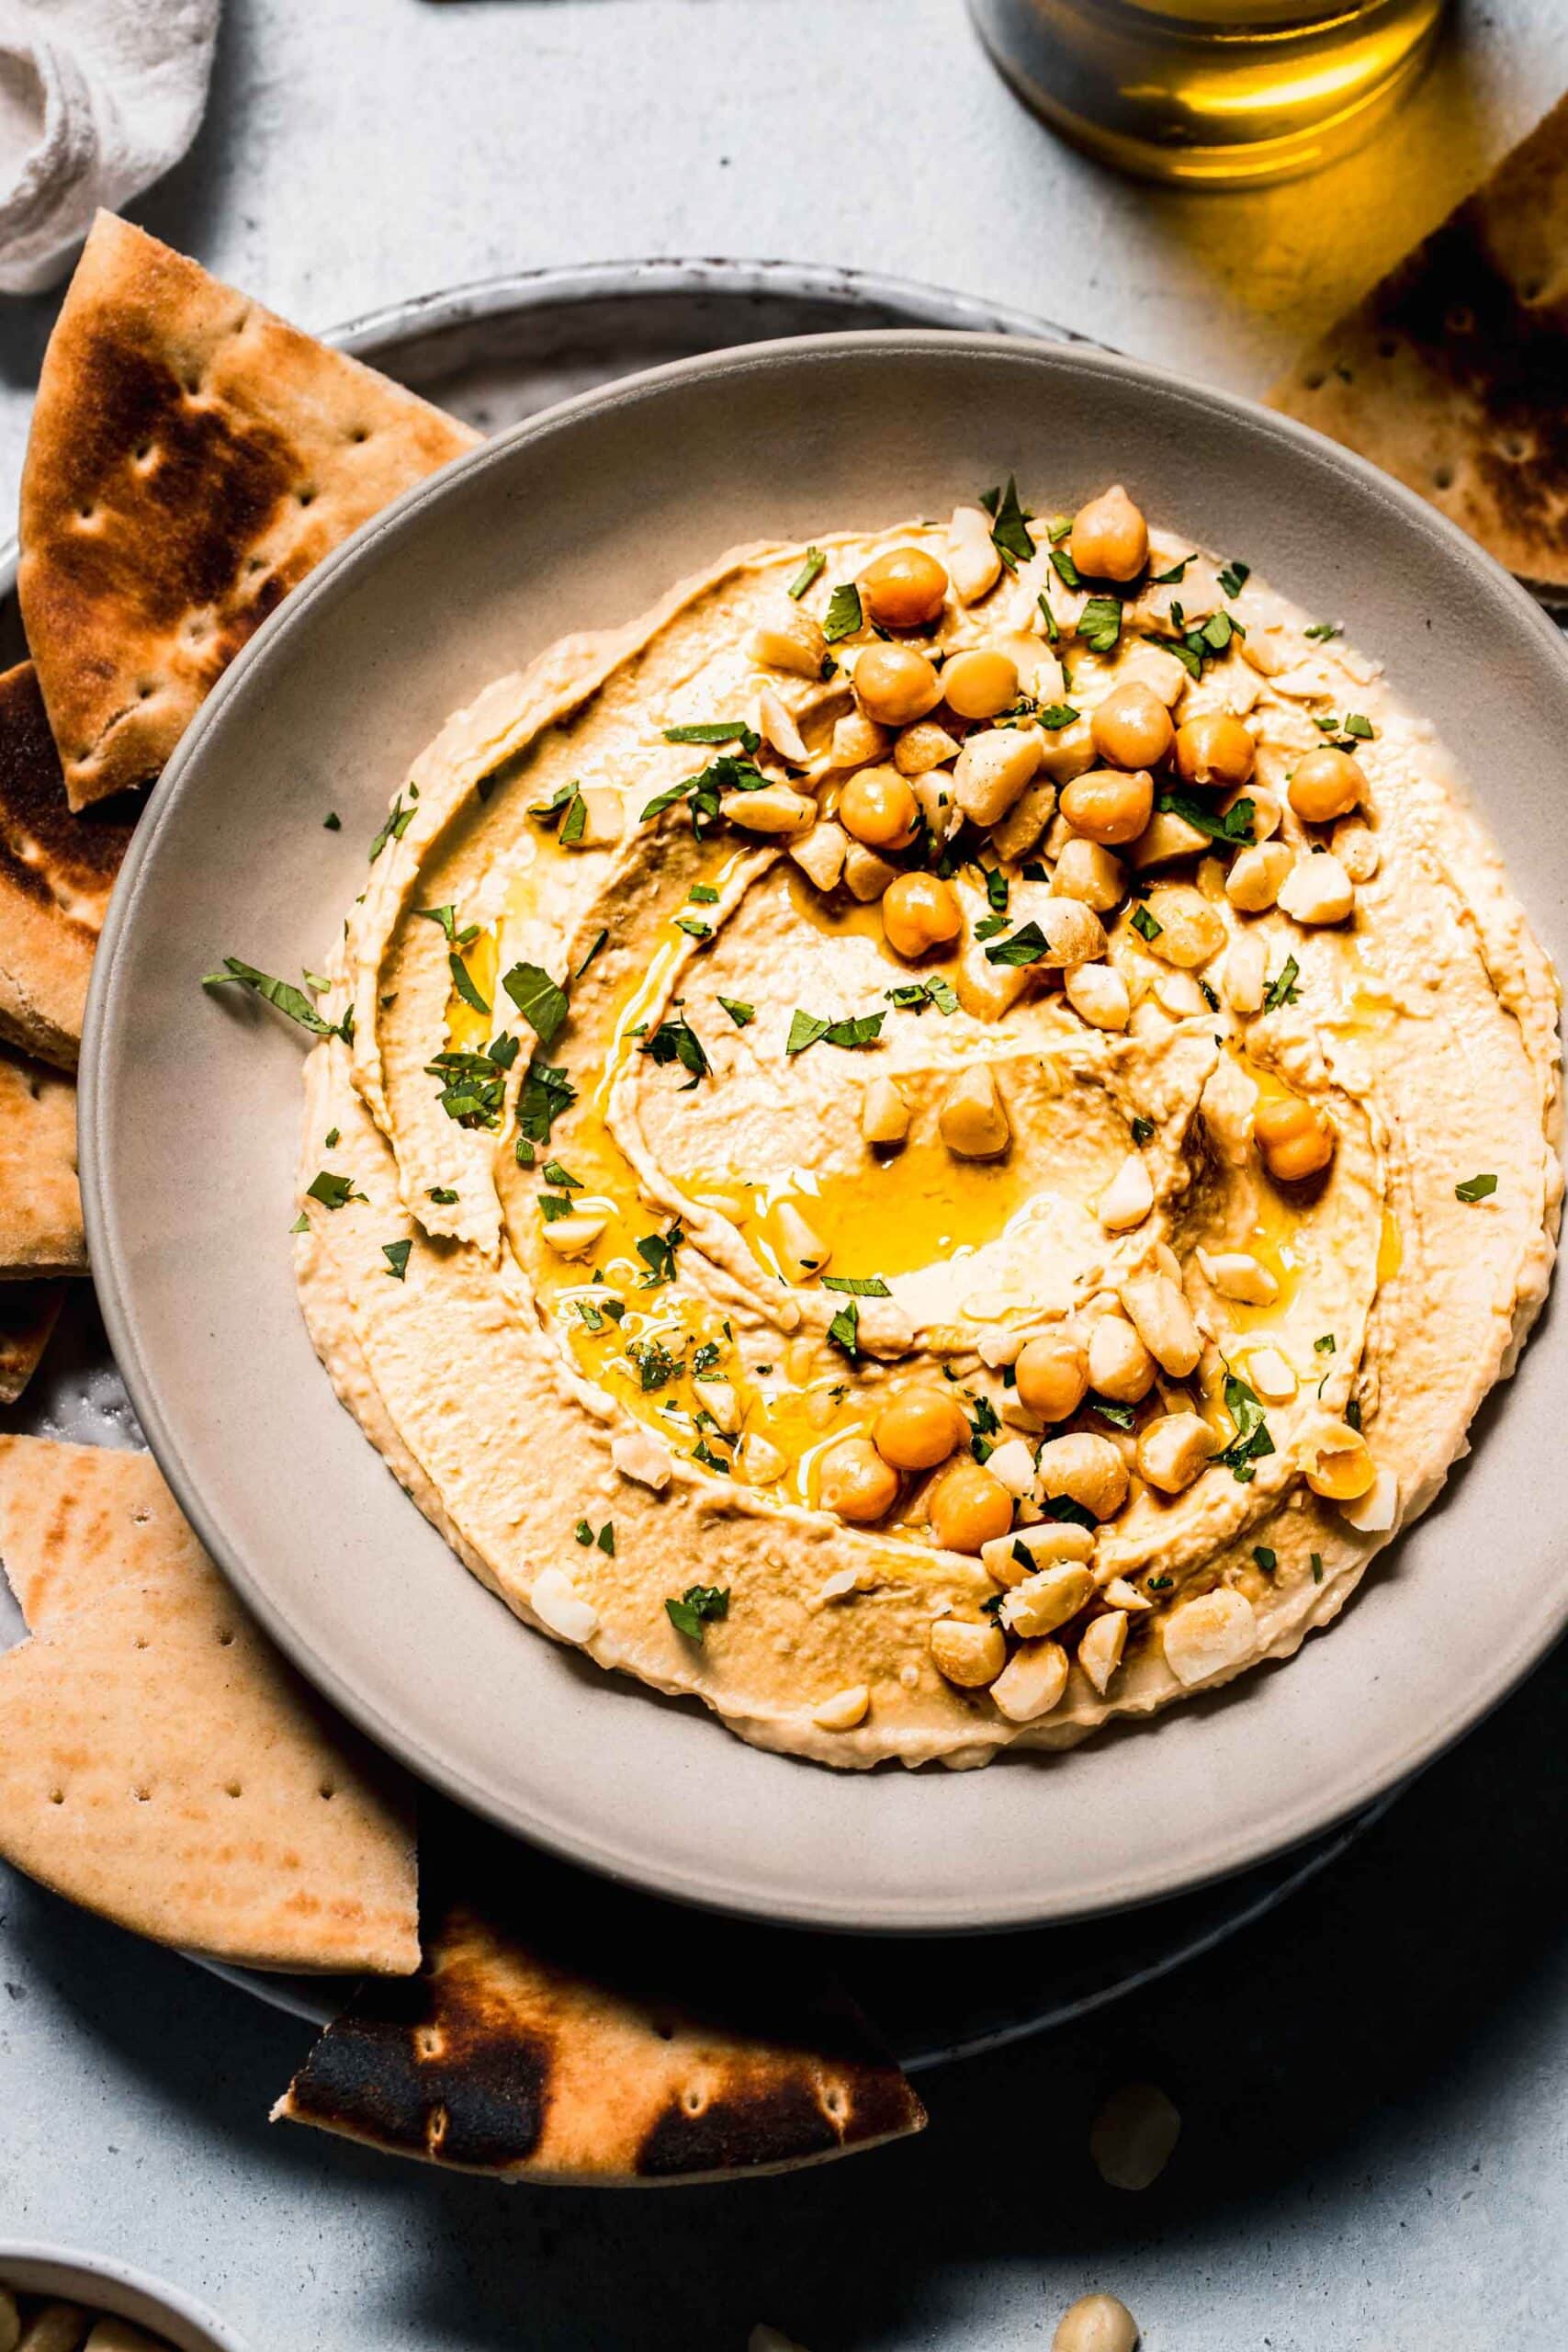 Macadamia nut hummus in bowl topped with macadamia nuts and parsley.